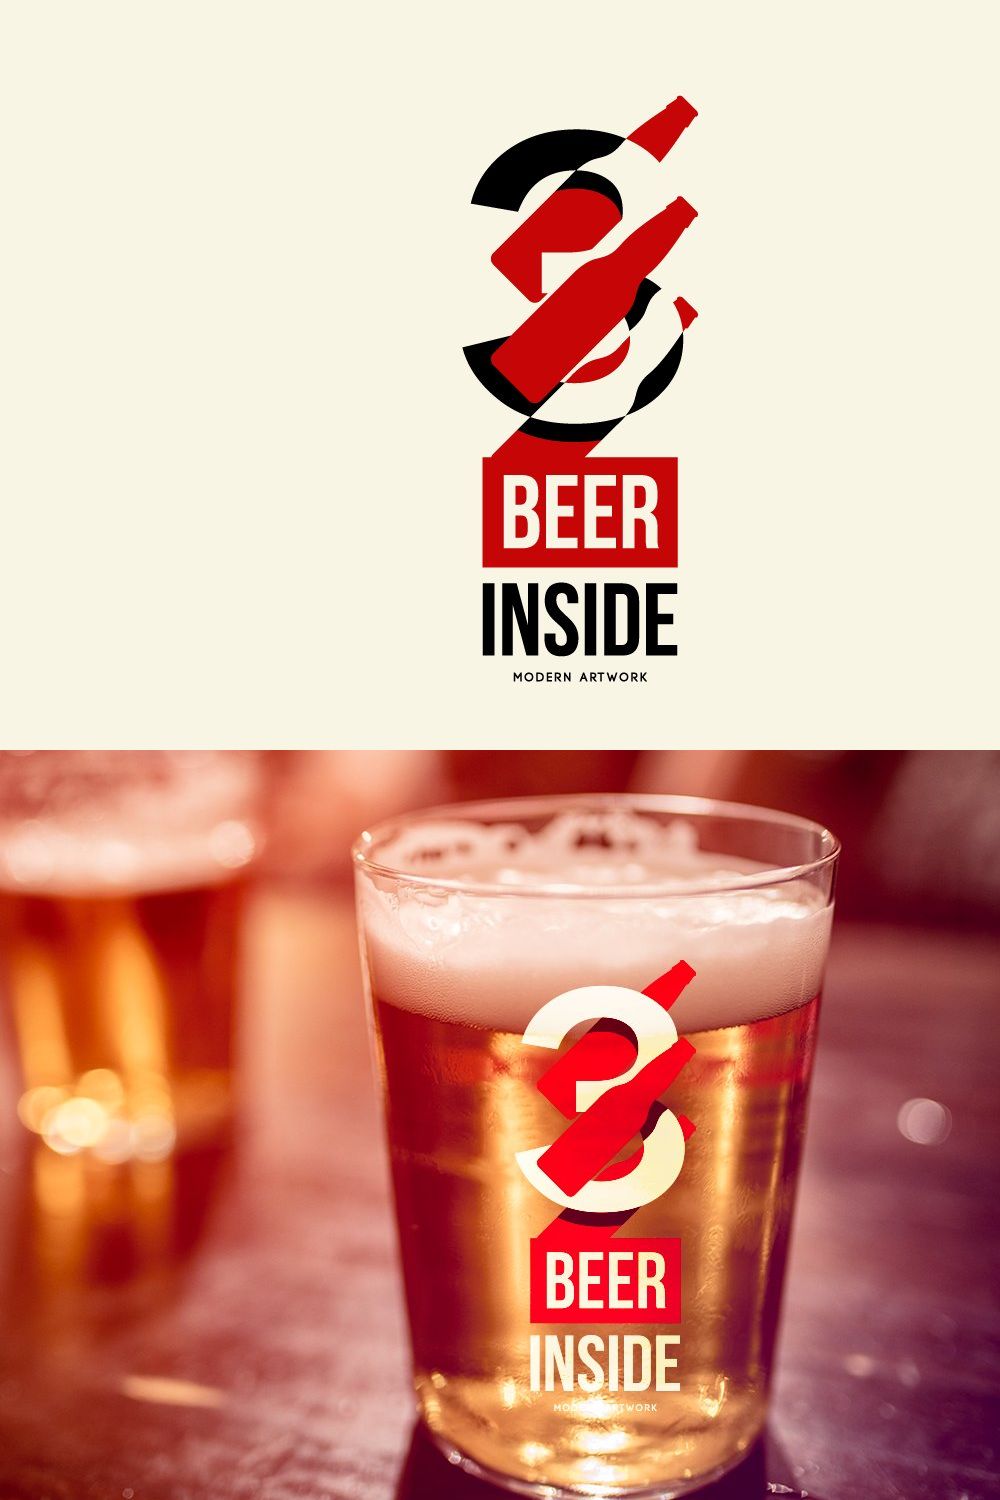 Craft beer brewery vector logo pinterest preview image.